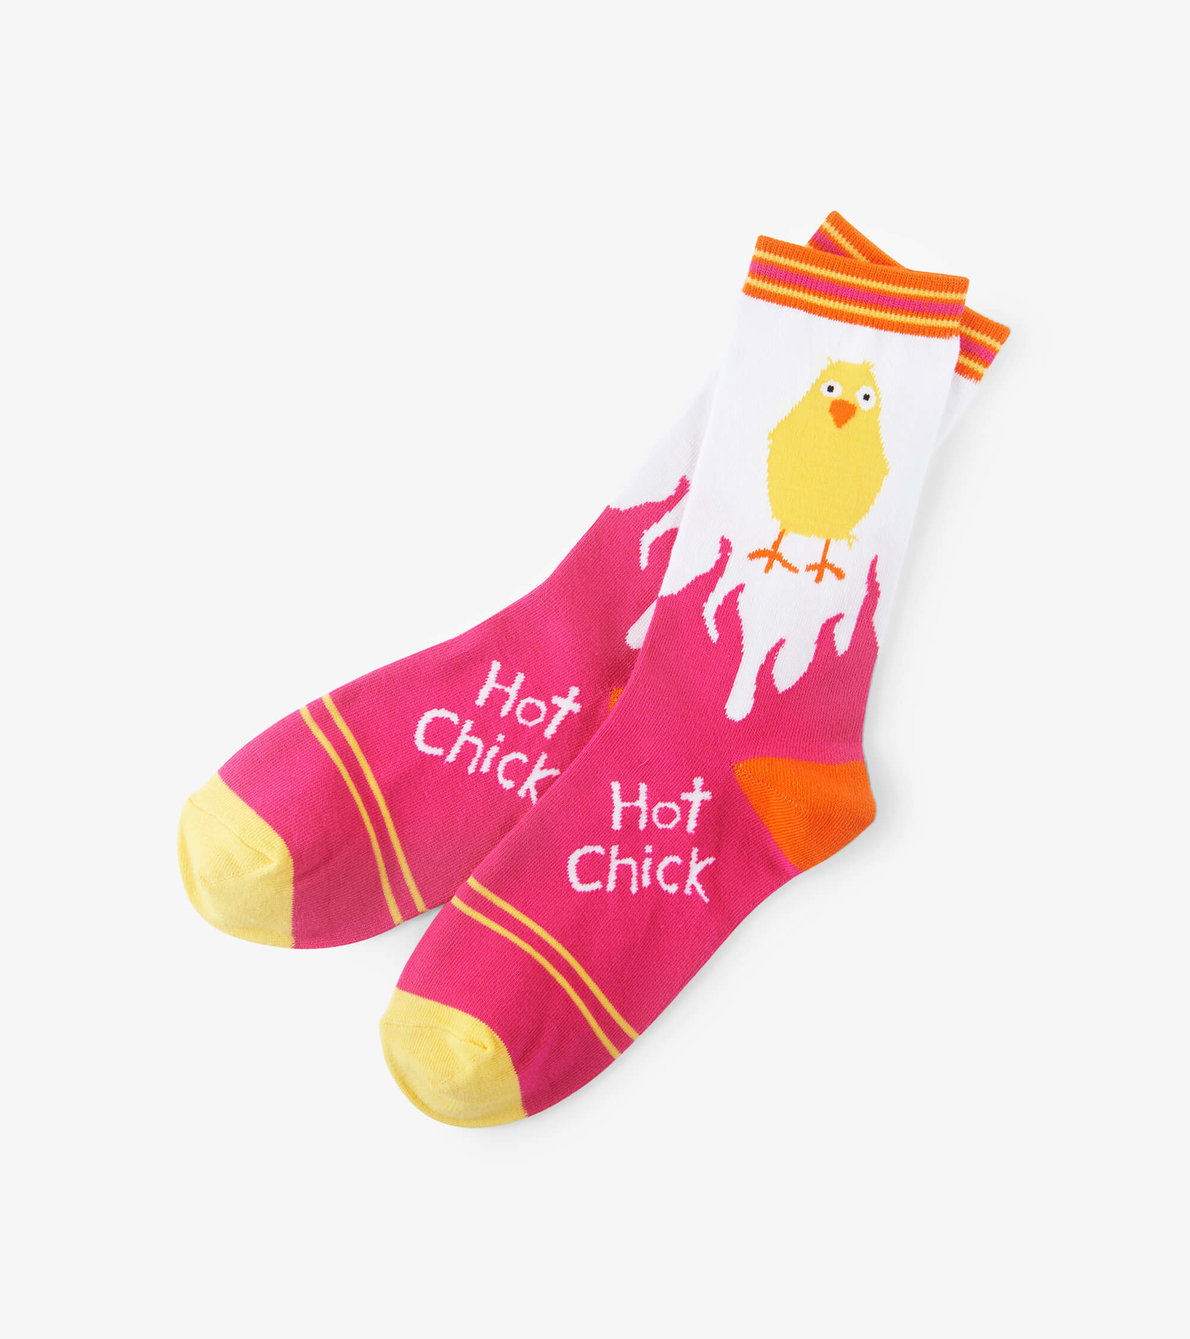 View larger image of Hot Chick Women's Crew Socks